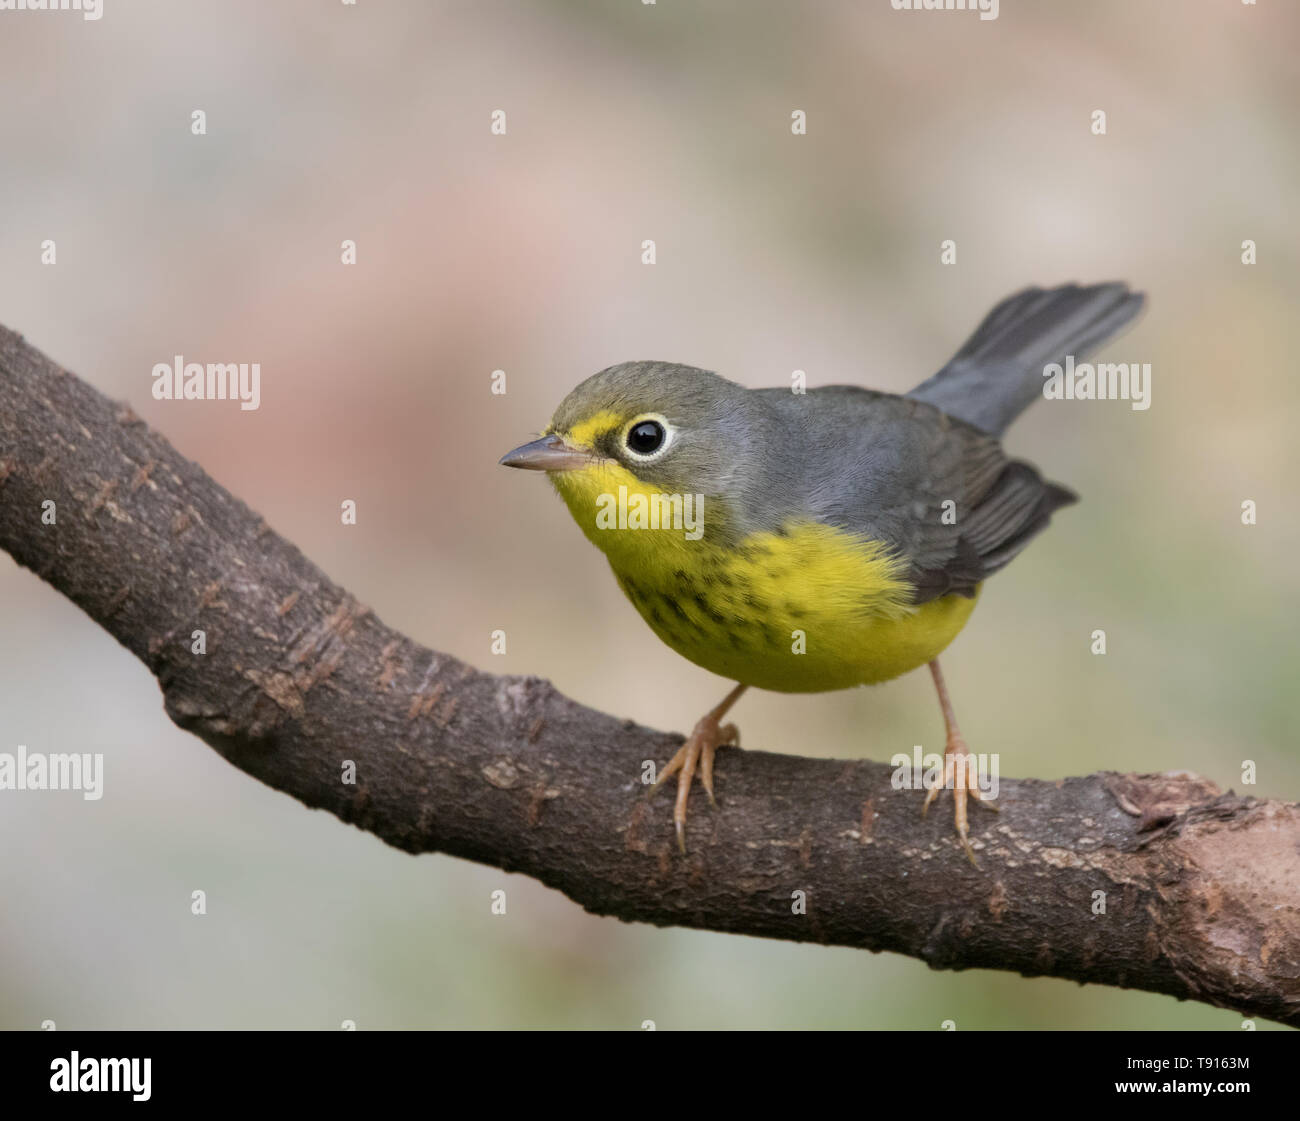 Canada Warbler, Cardellina canadensis, perched in Saskatoon, Canada Stock Photo